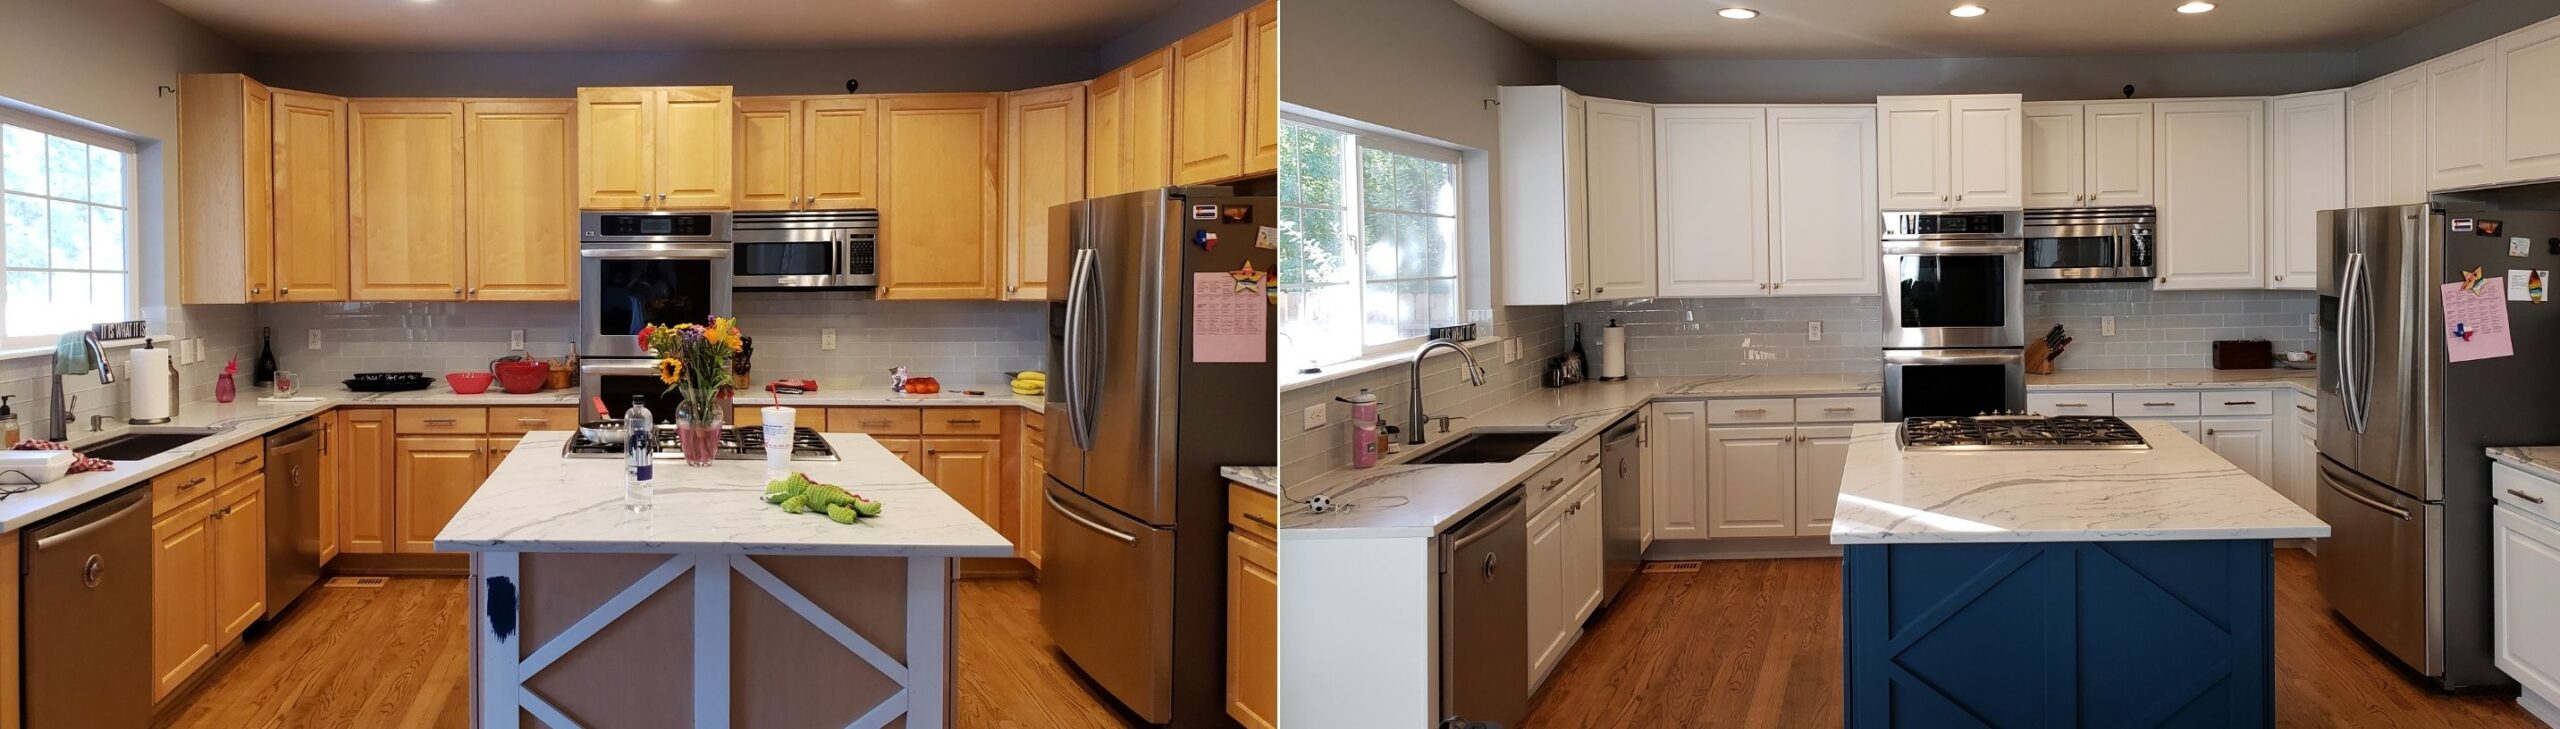 Cabinet Painting Kitchen Transformed